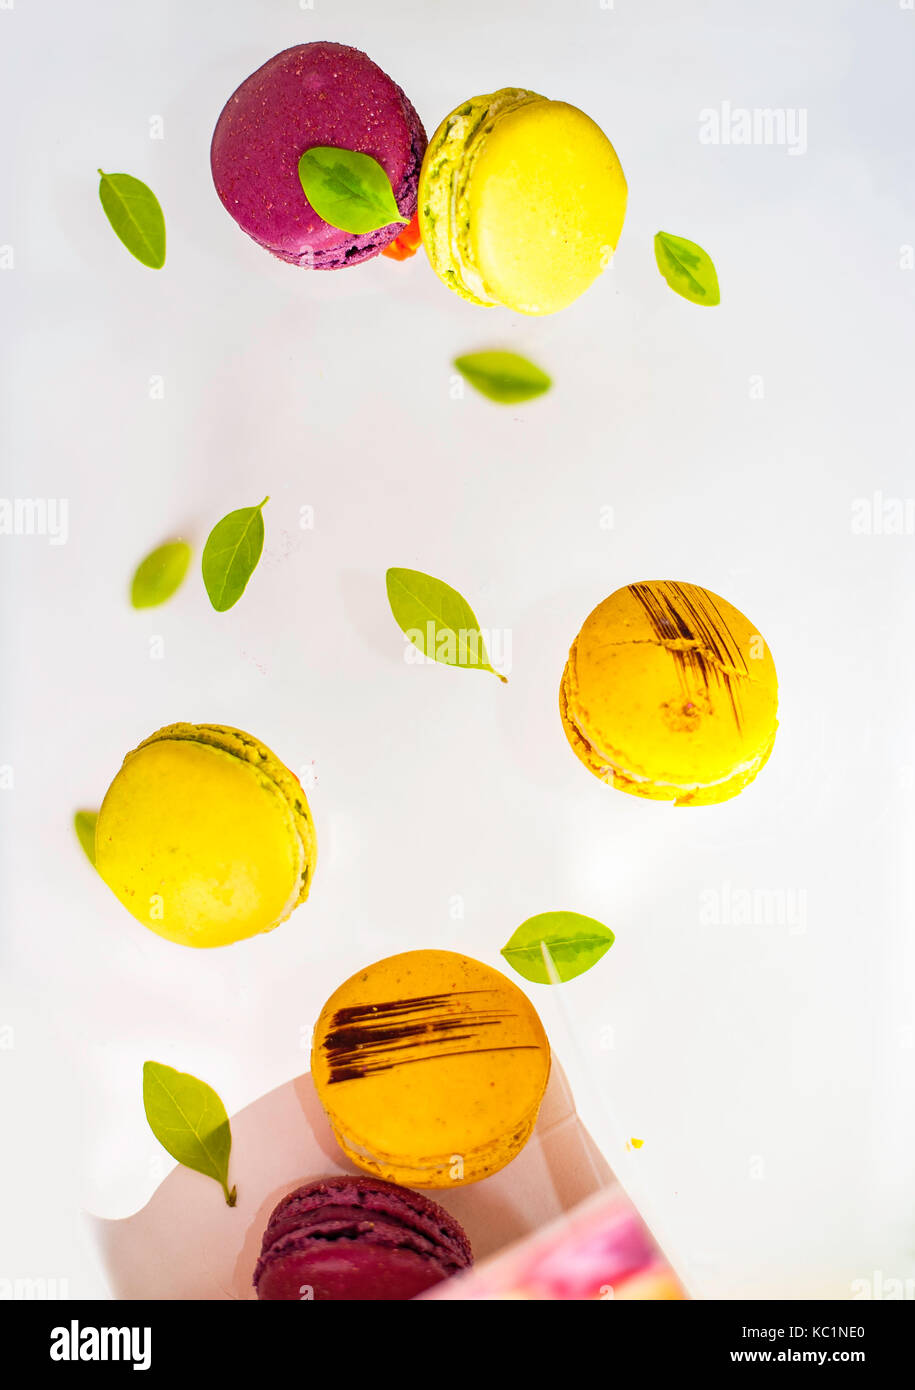 Flying macarons with green leaves Stock Photo